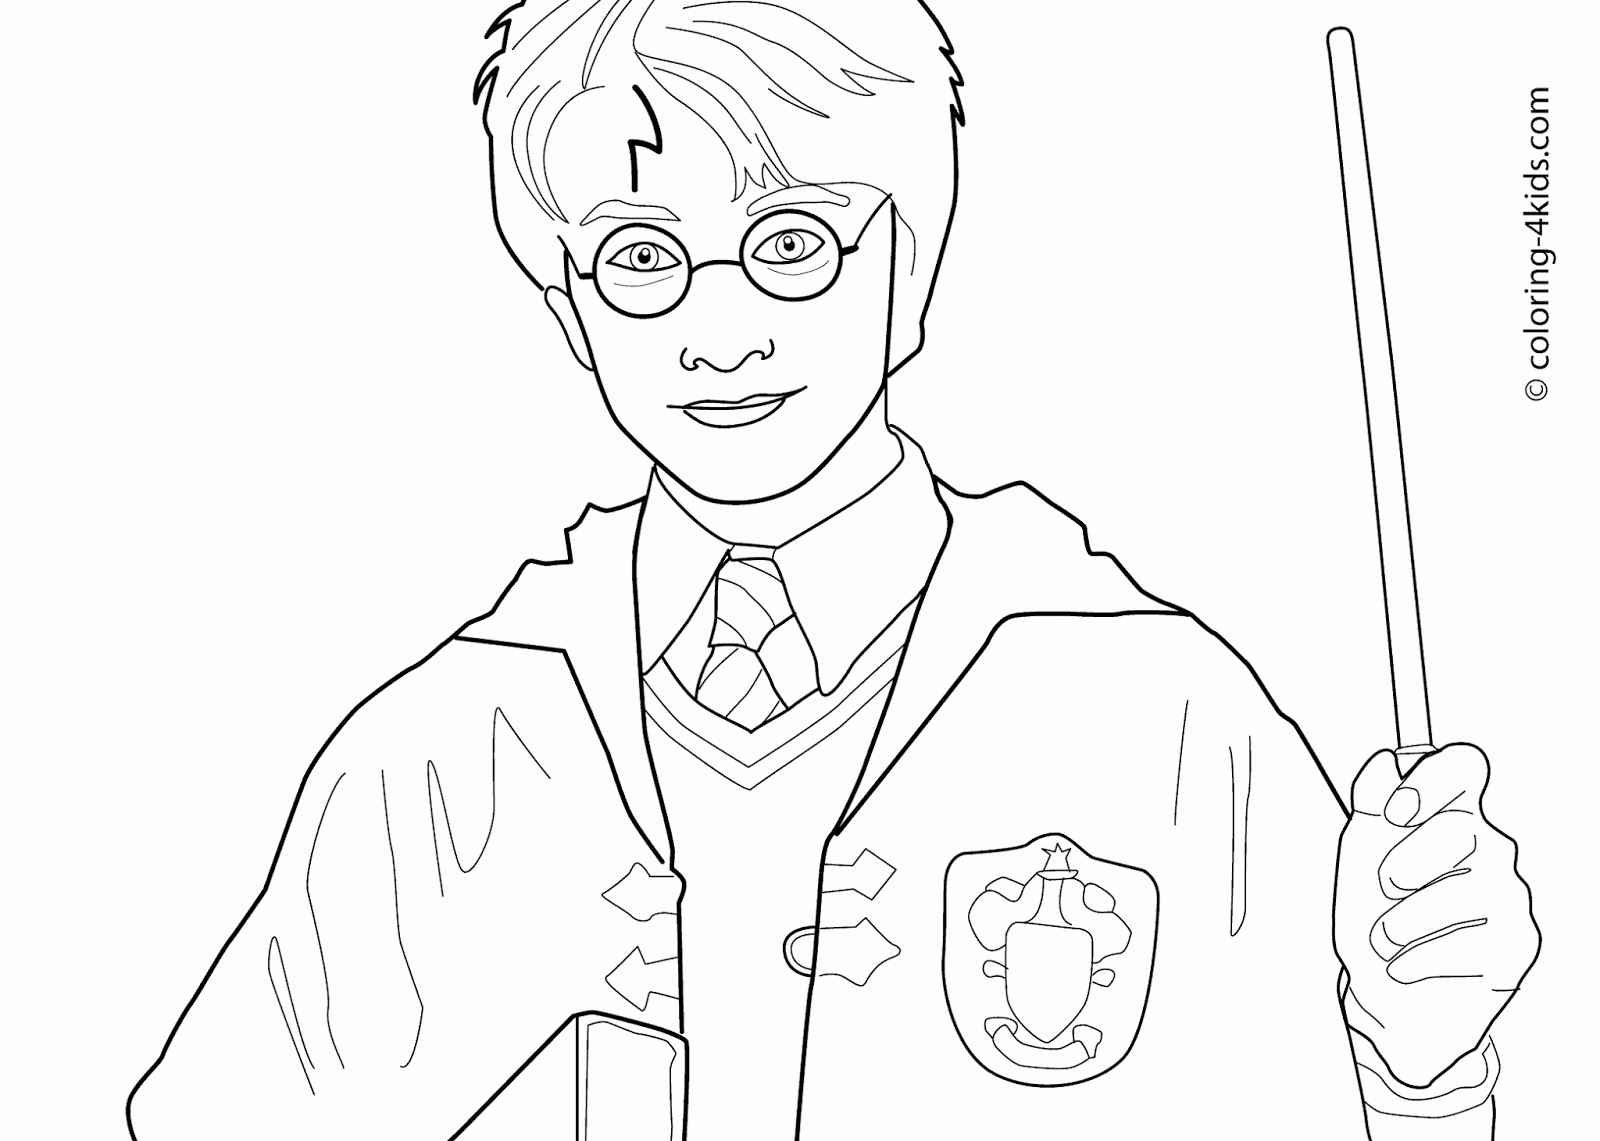 howgwarts outline clipart - Clipground